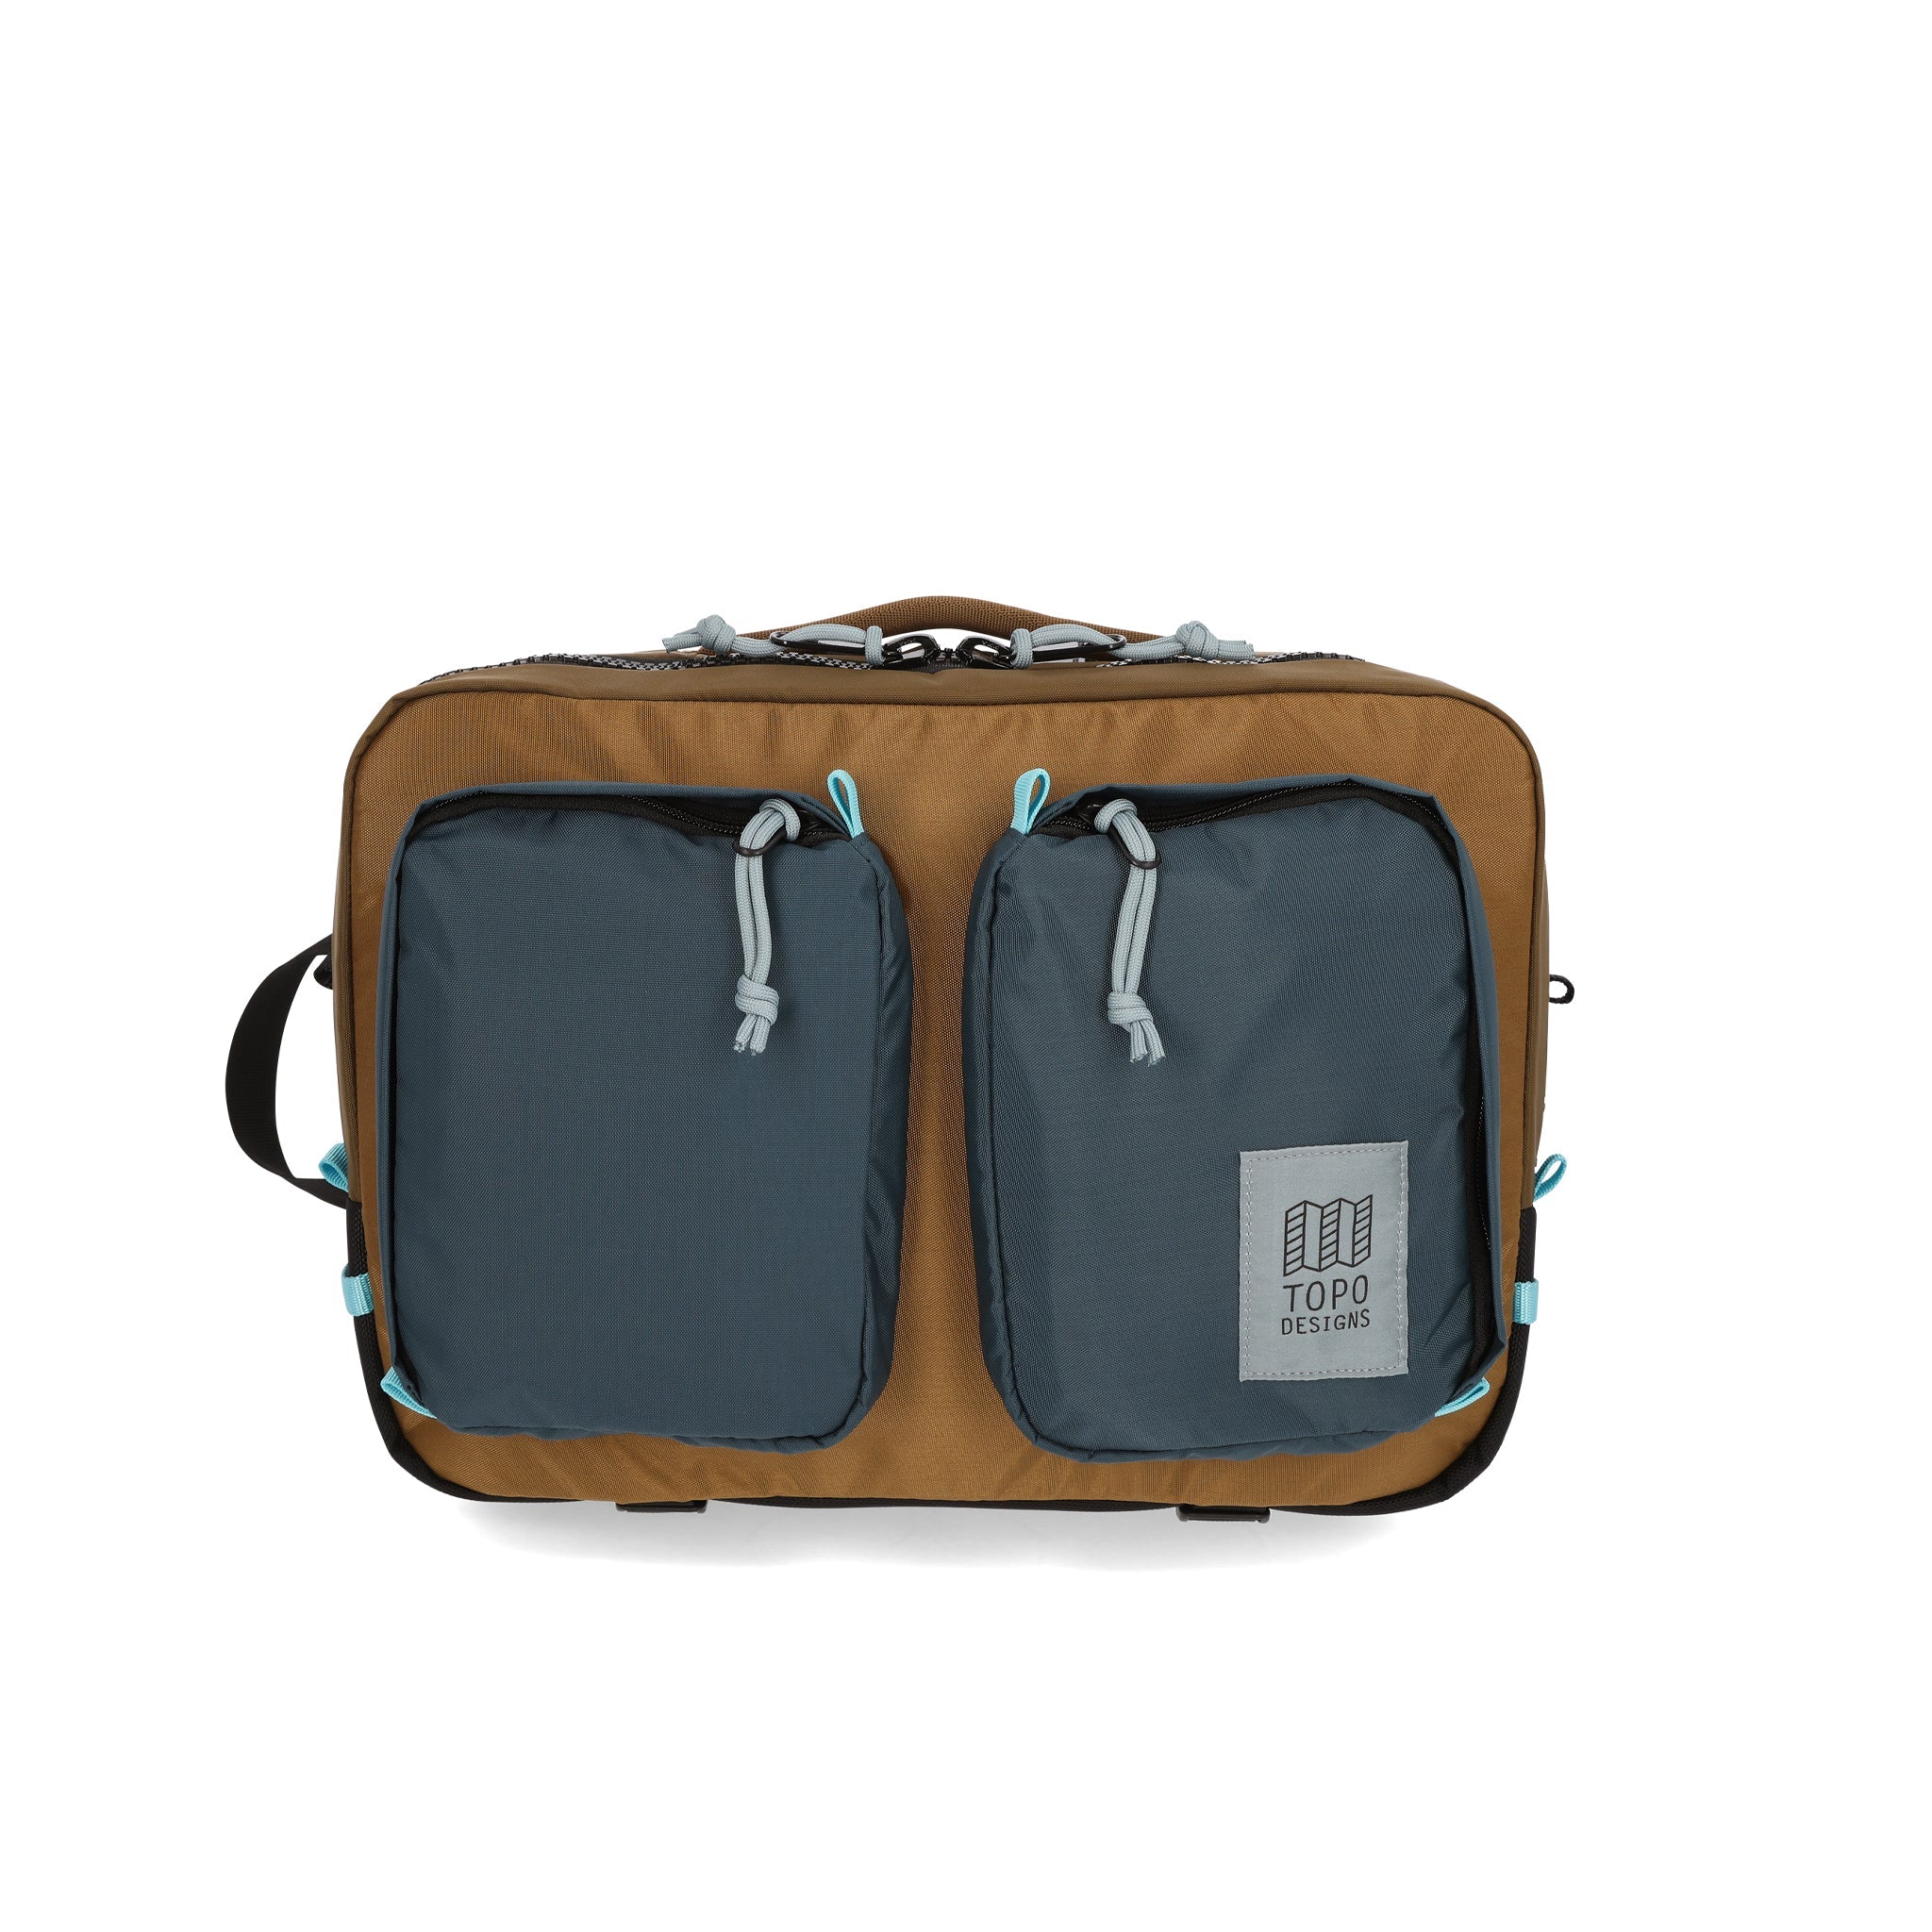 Topo Designs Global Briefcase convertible laptop travel backpack in recycled "Desert Palm / Pond Blue" nylon.